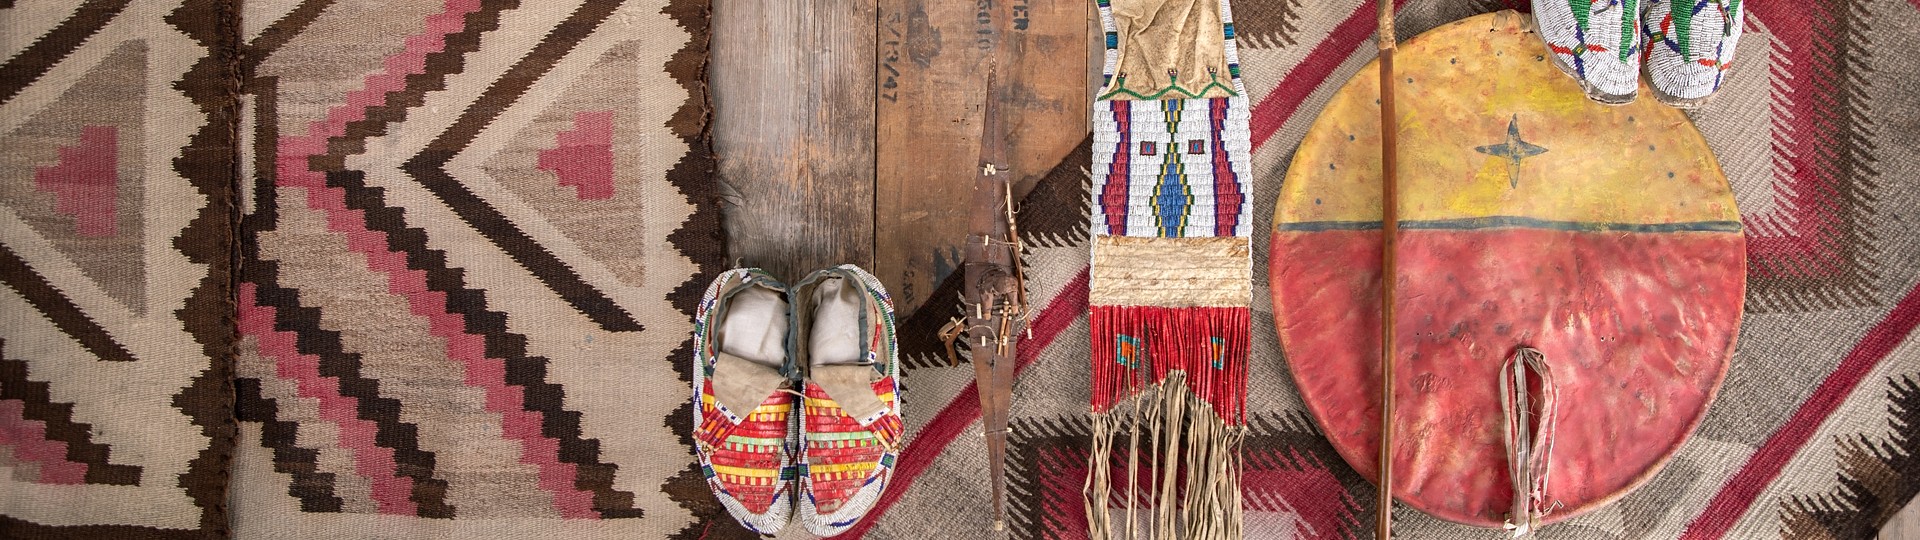 Old West Sale: Native American, Art, Cowboy, Rugs, jewelry by North American Auction Company